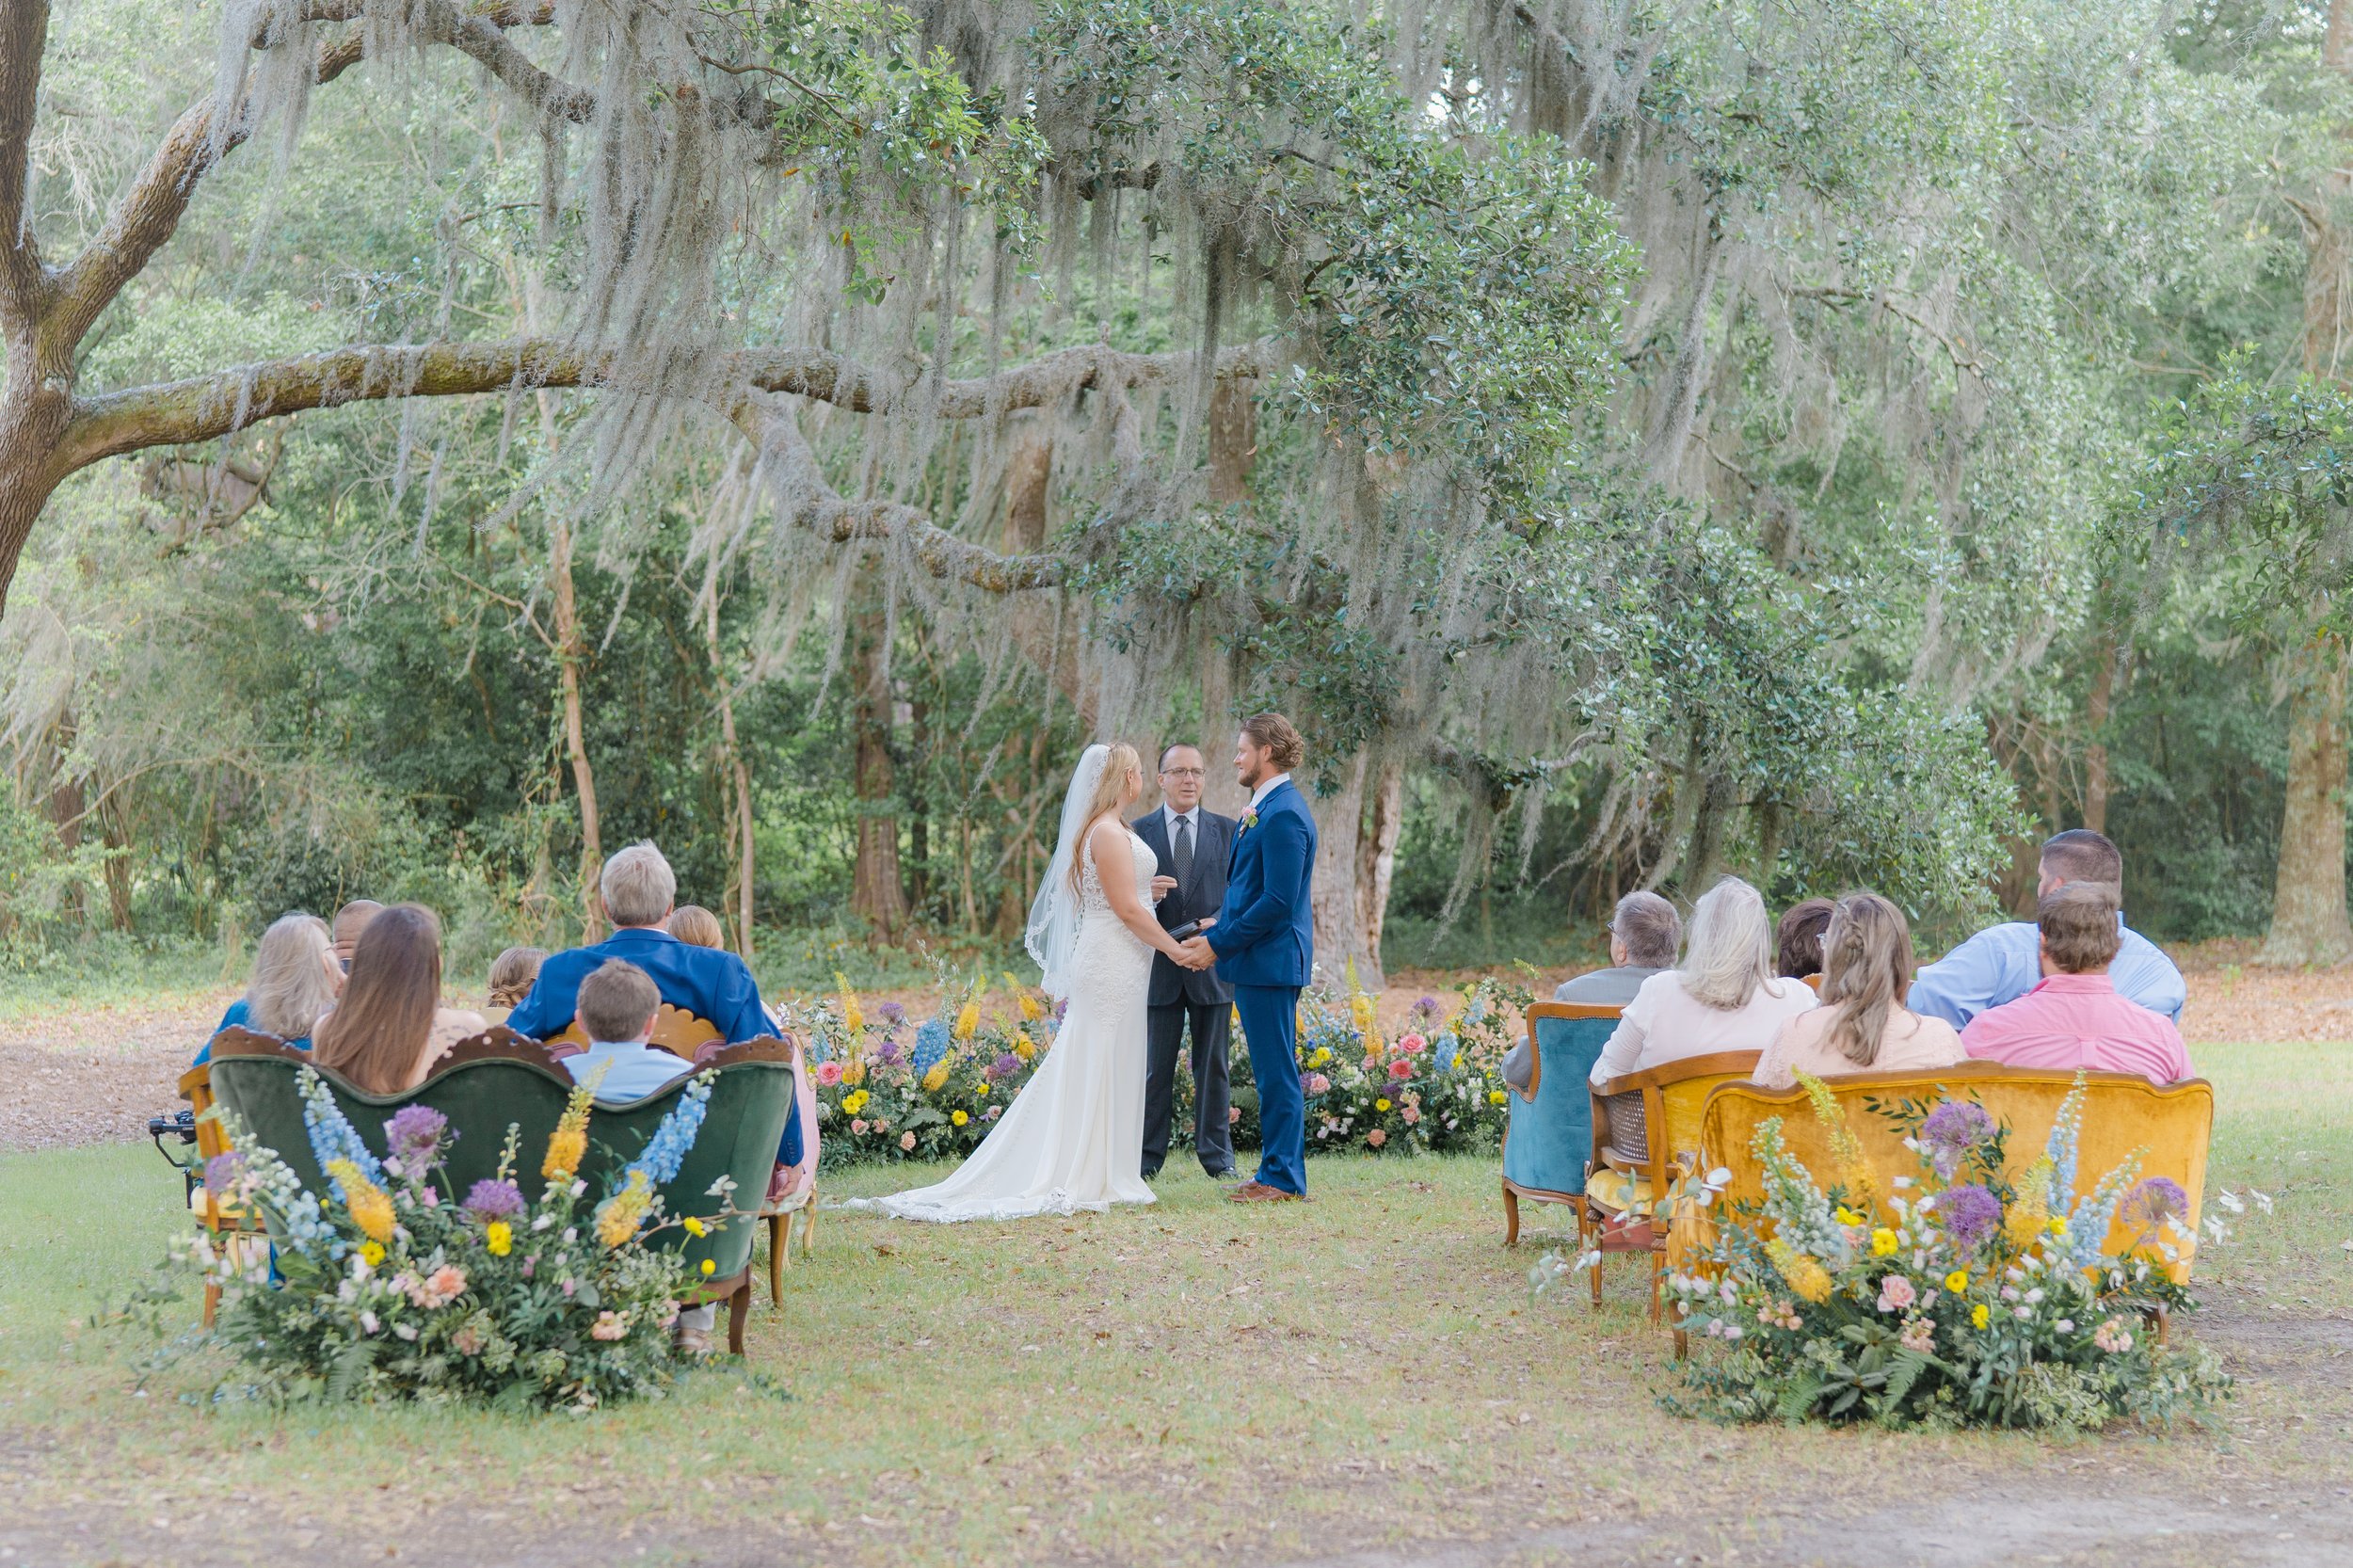 intimate spring wedding ceremony in charleston with colorful vintage couches